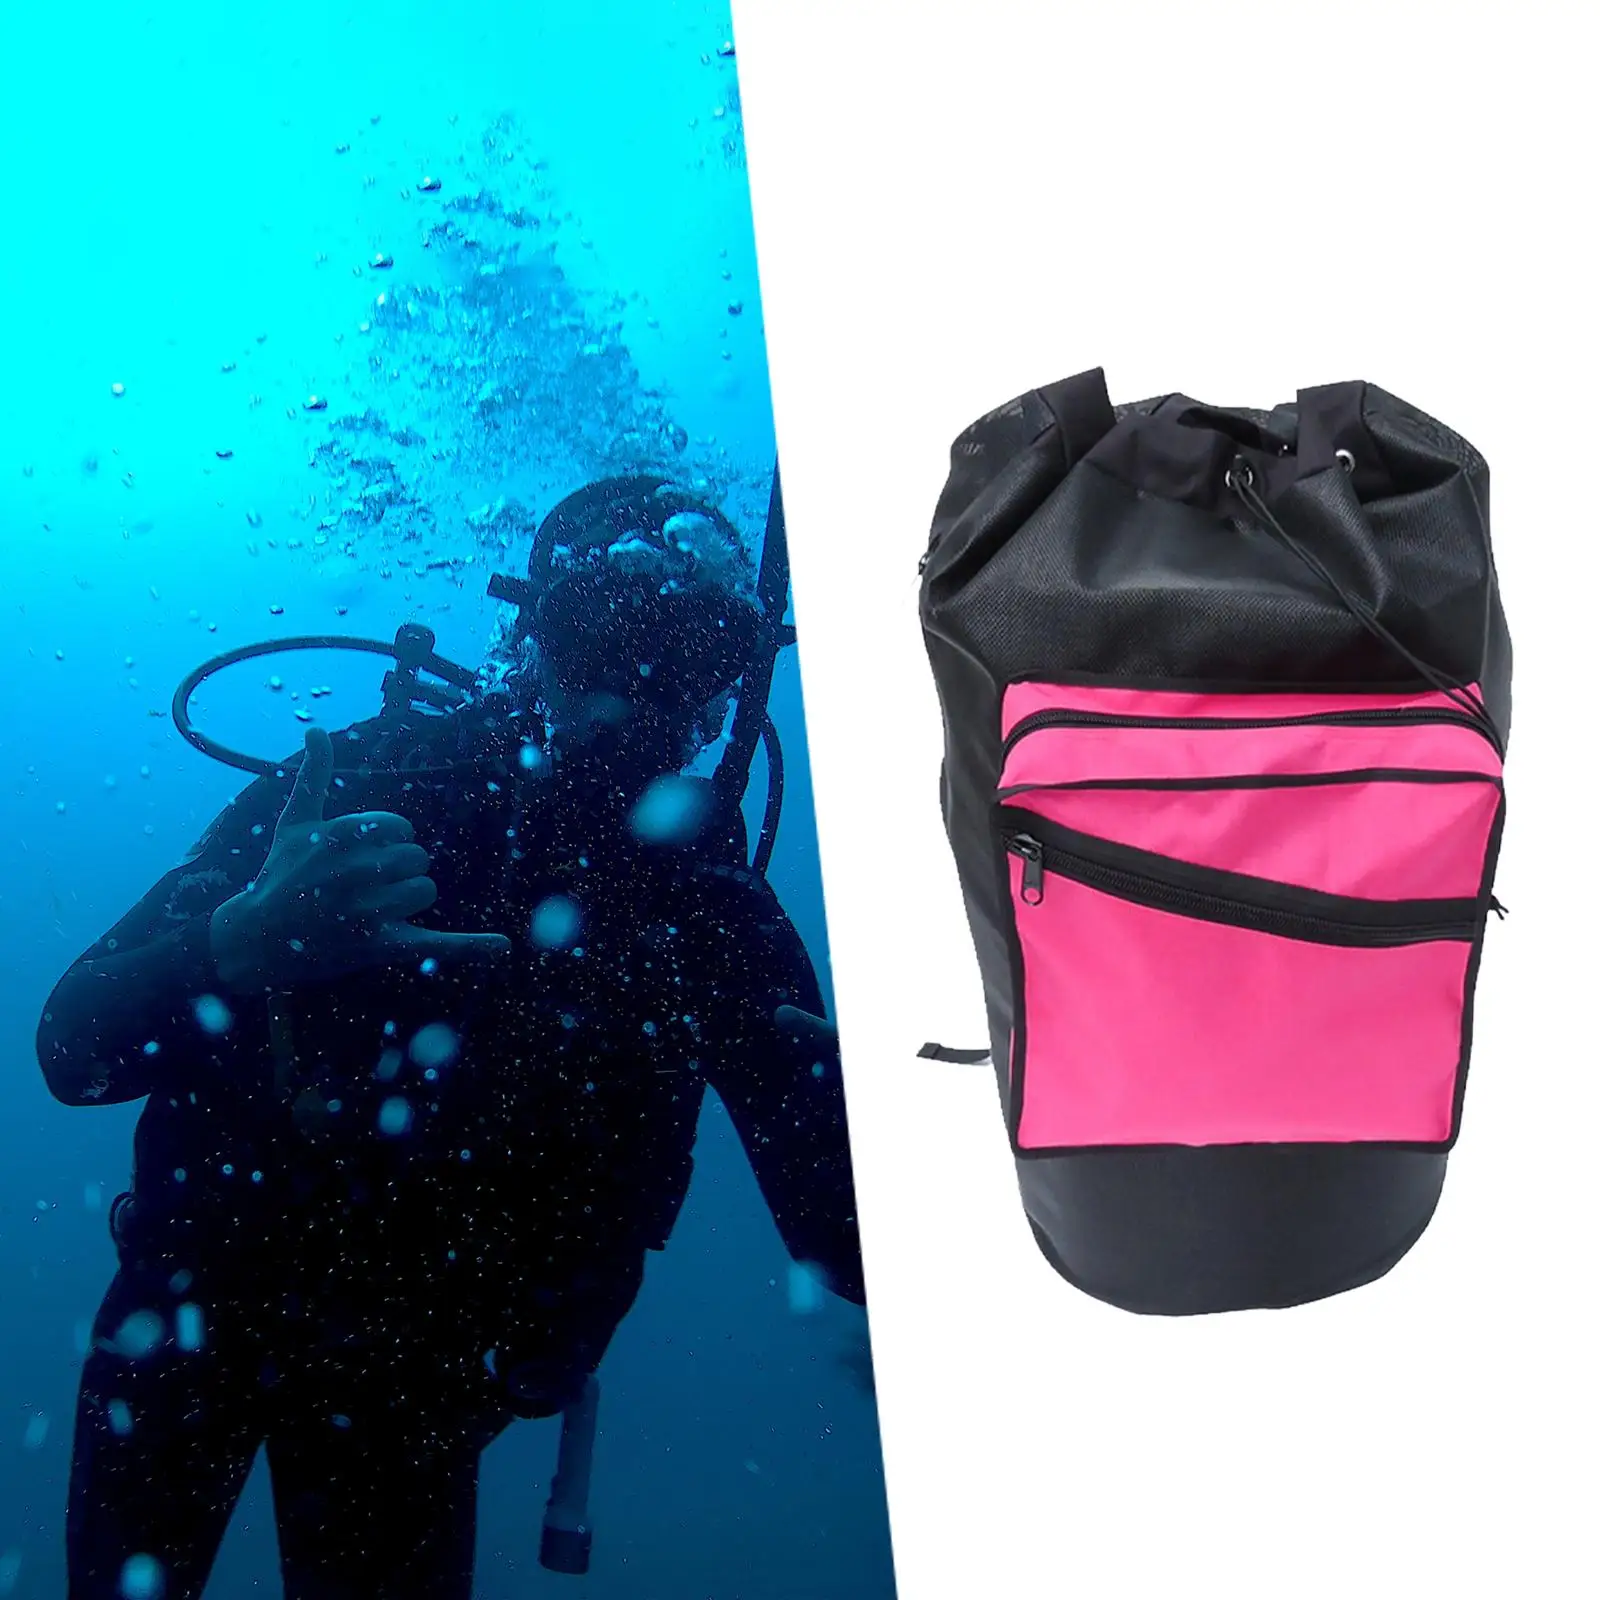 Scuba Diving Bag Heavy Duty Diving Storage Bag for Mask, Fins and Wetsuit Diving Dry Bag for Equipment Beach Water Sport Gear